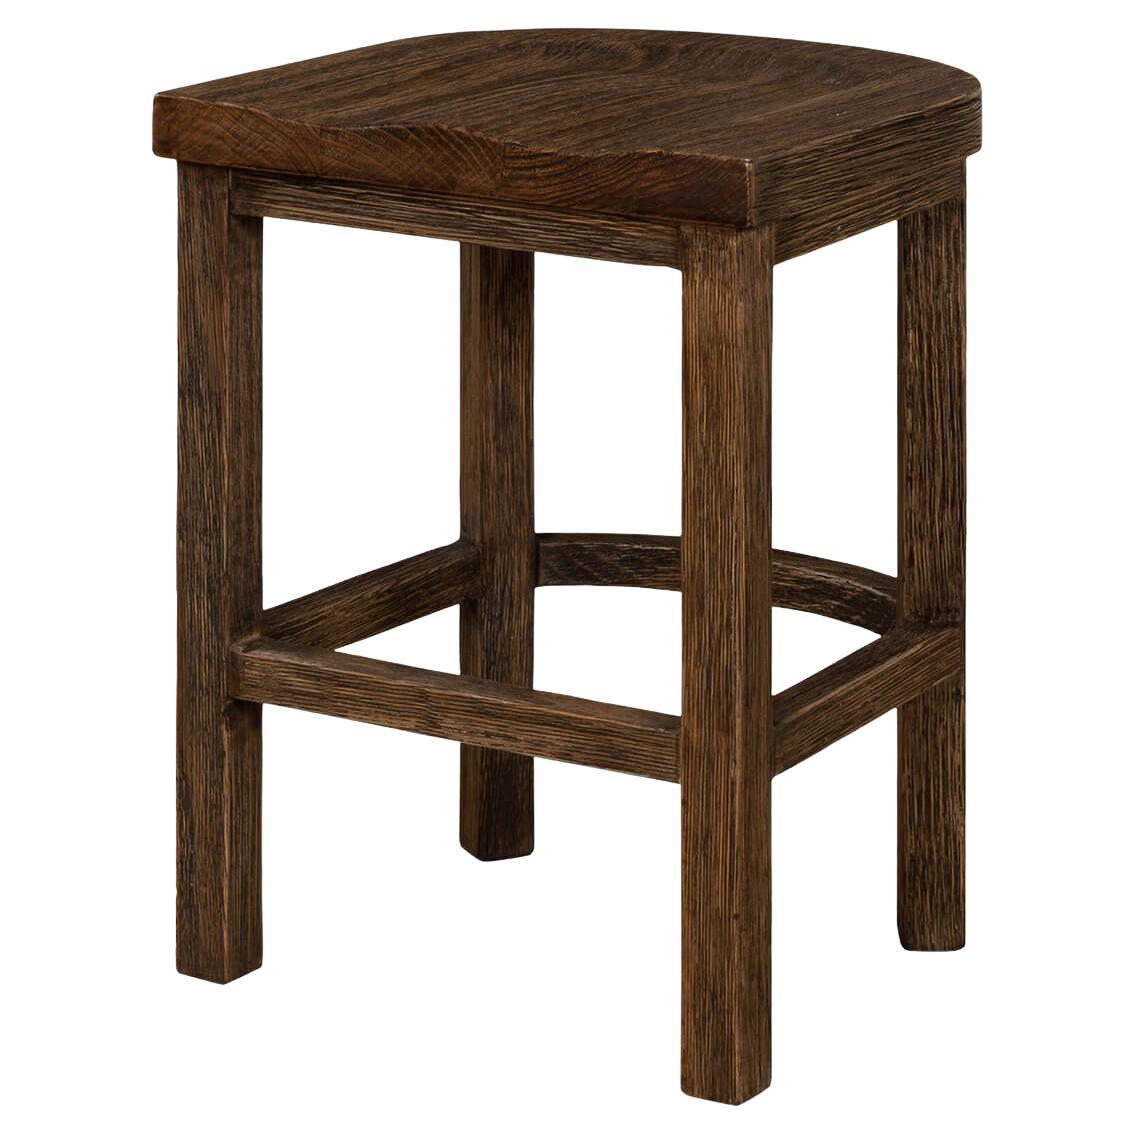 Bold Industrial Counter Stool